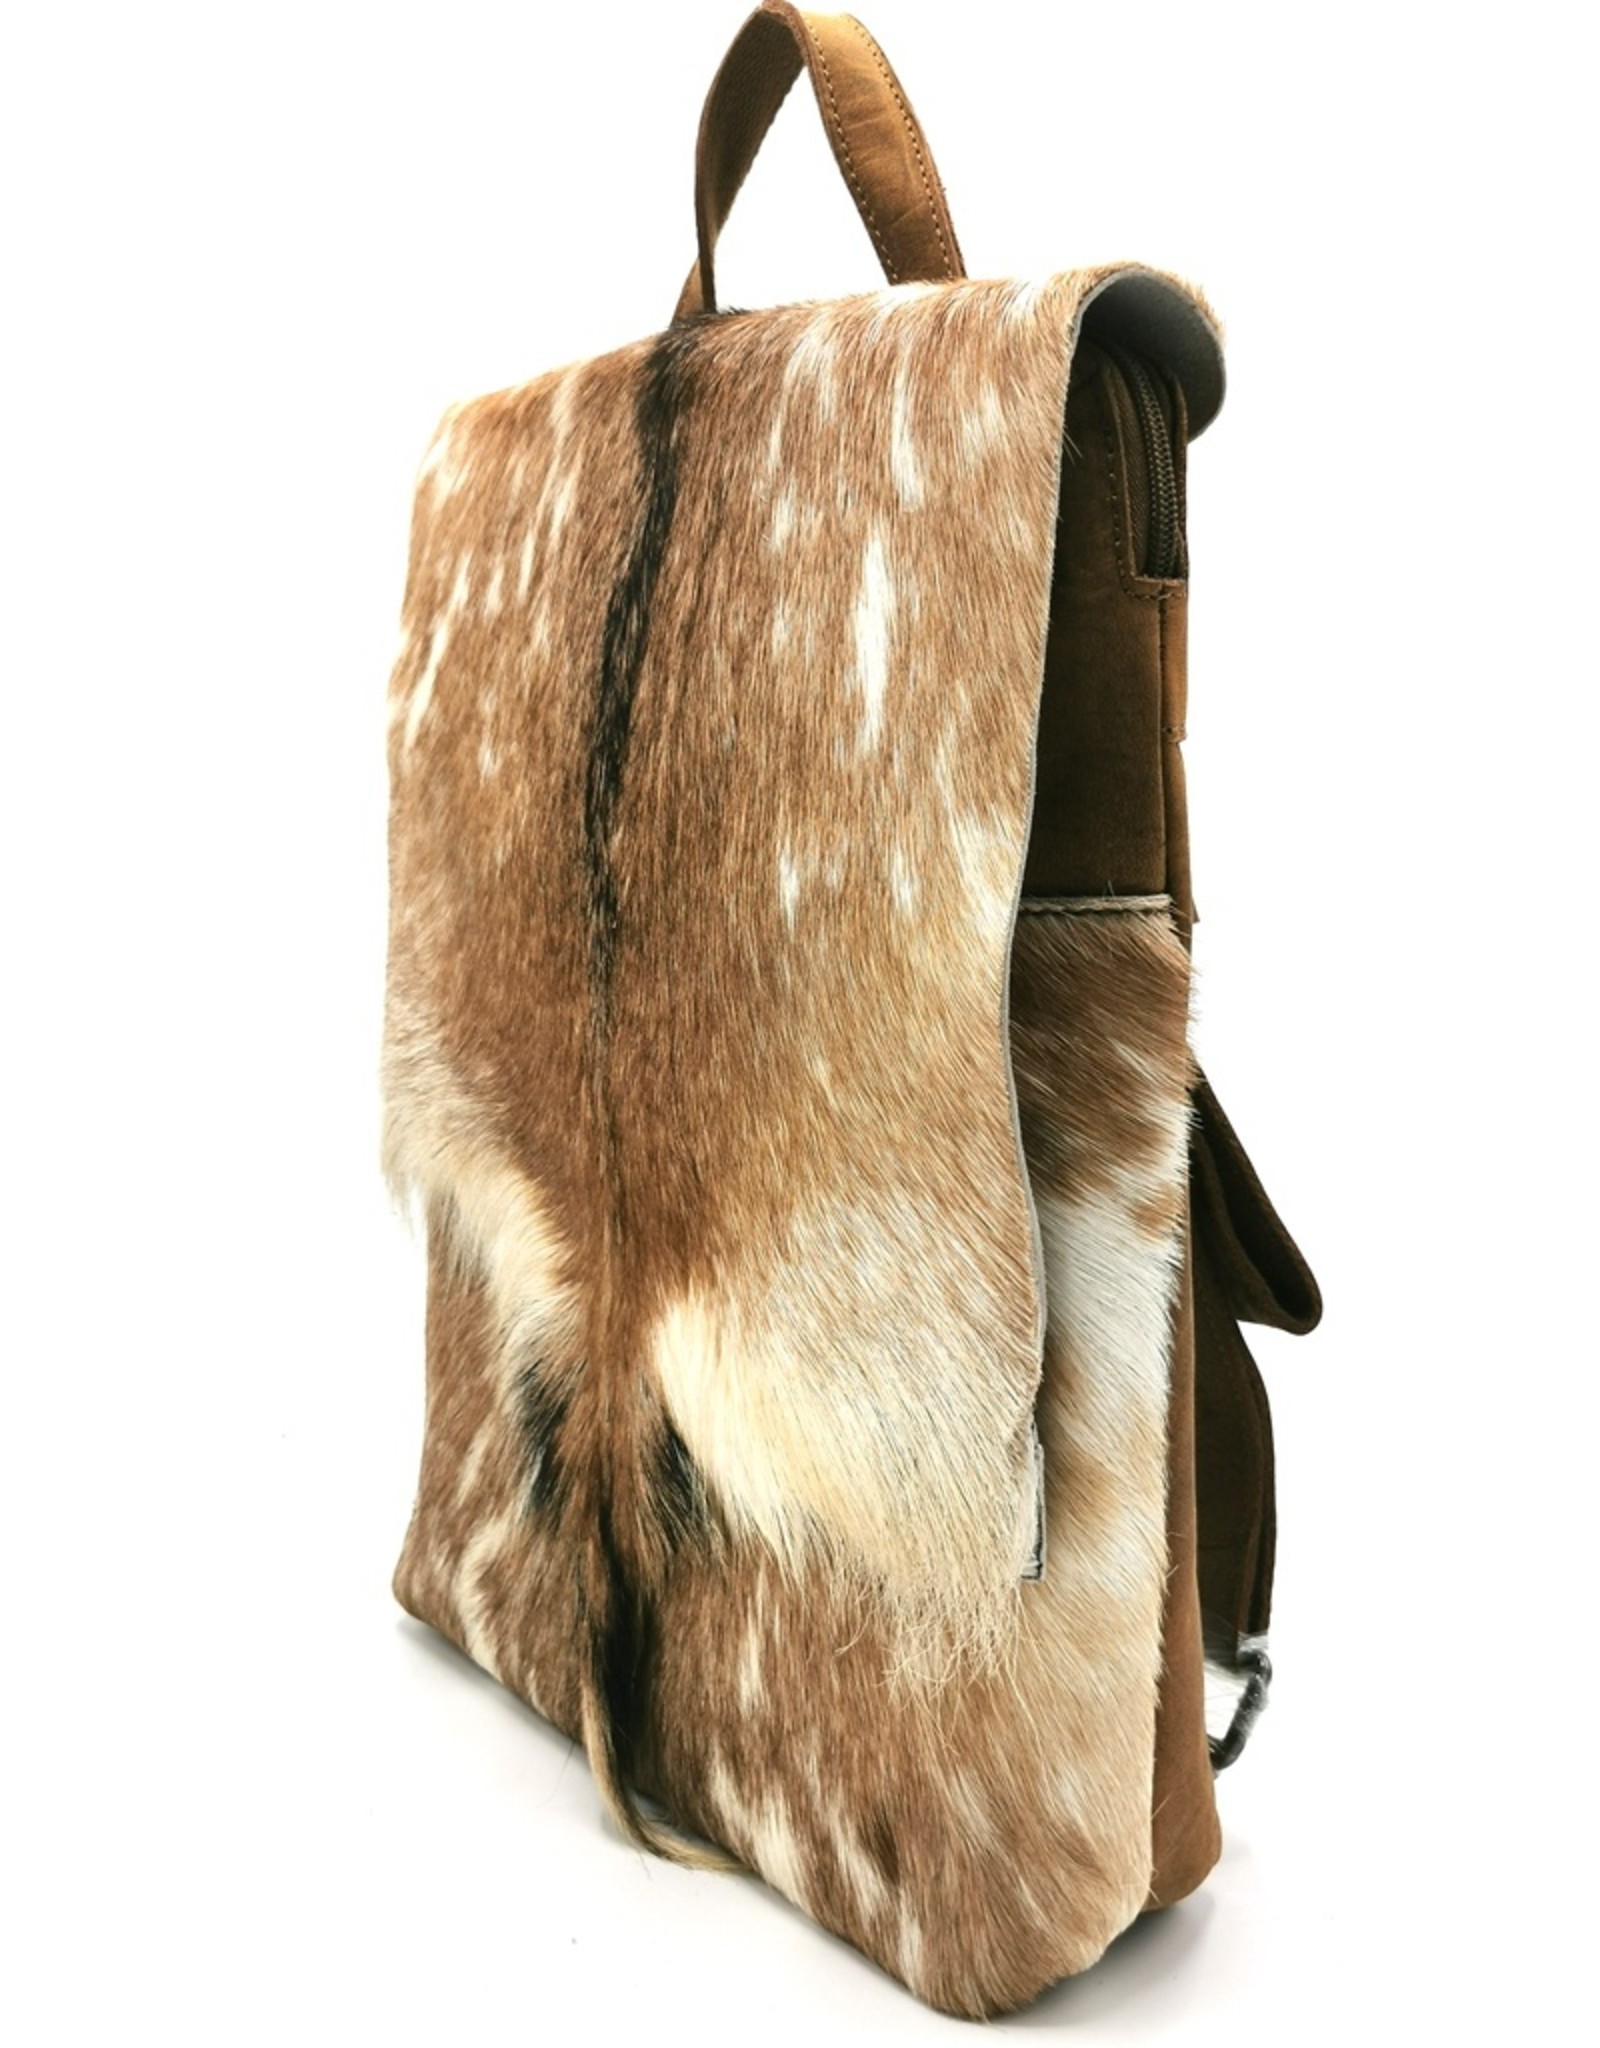 Hide & Stitches Leather backpacks  and leather shoppers - Hide & Stitches Leather Backpack with Fur Cover Brown - 2